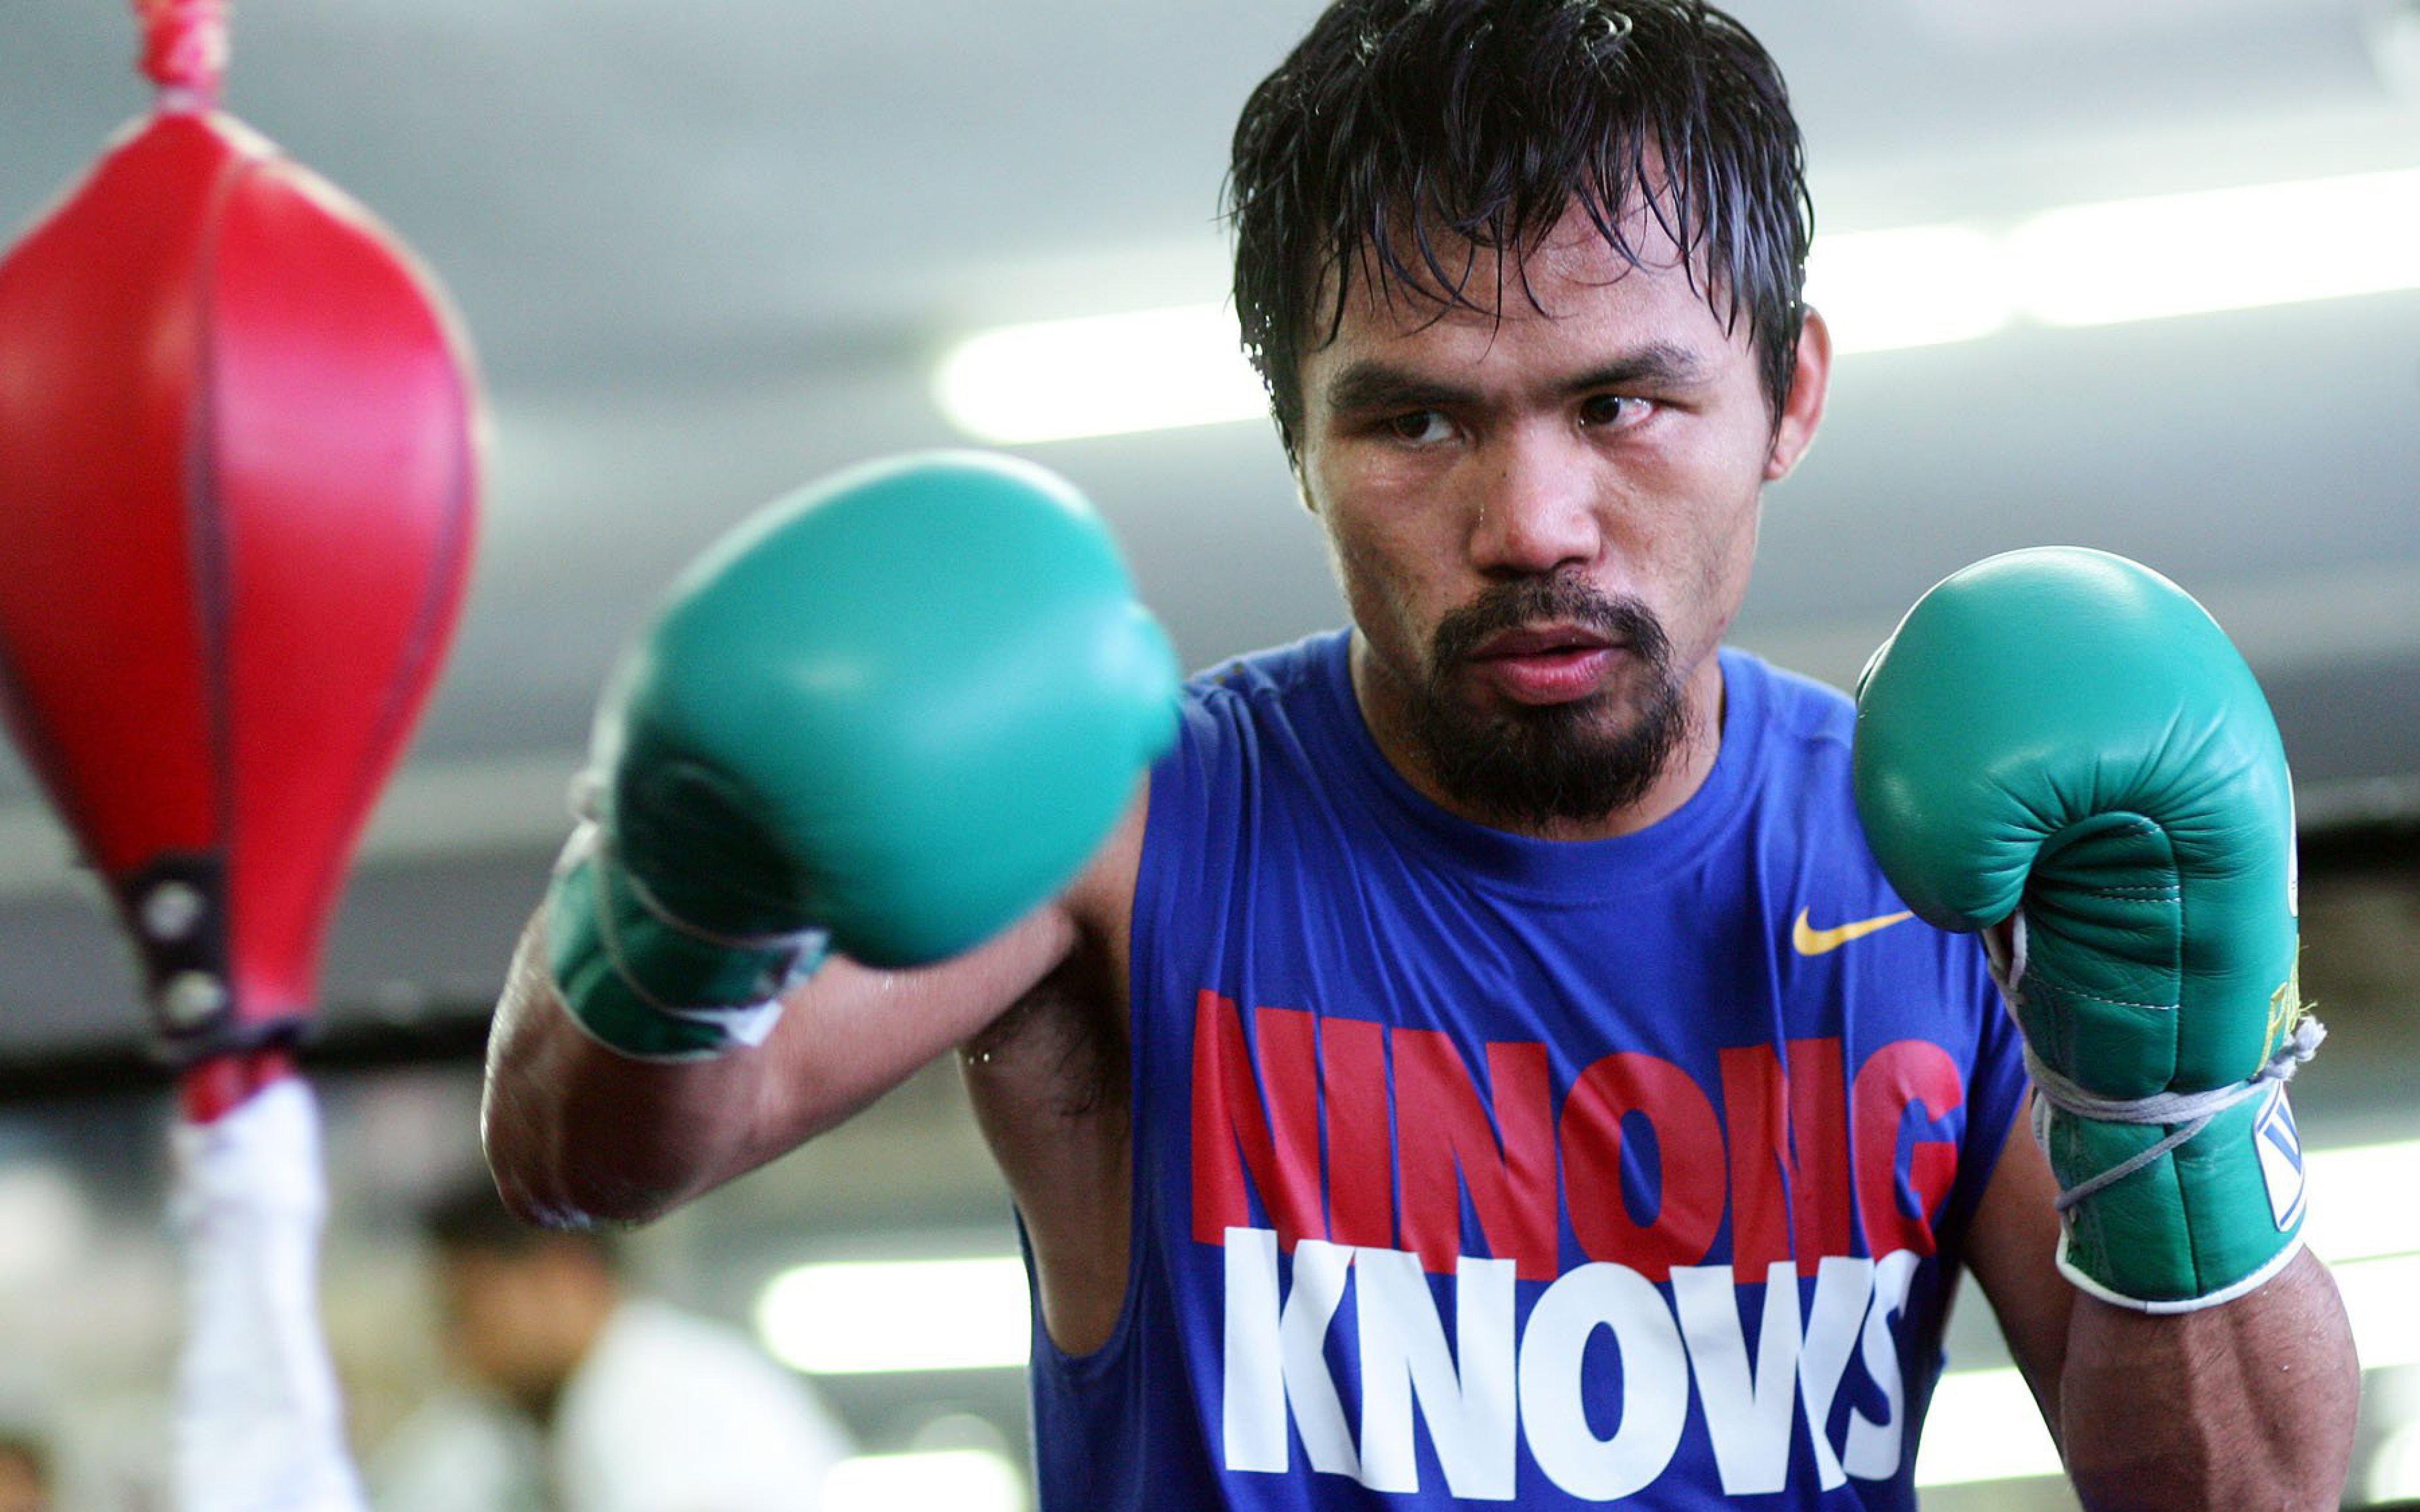 Download wallpaper Manny Pacquiao, 4k, boxer, champion